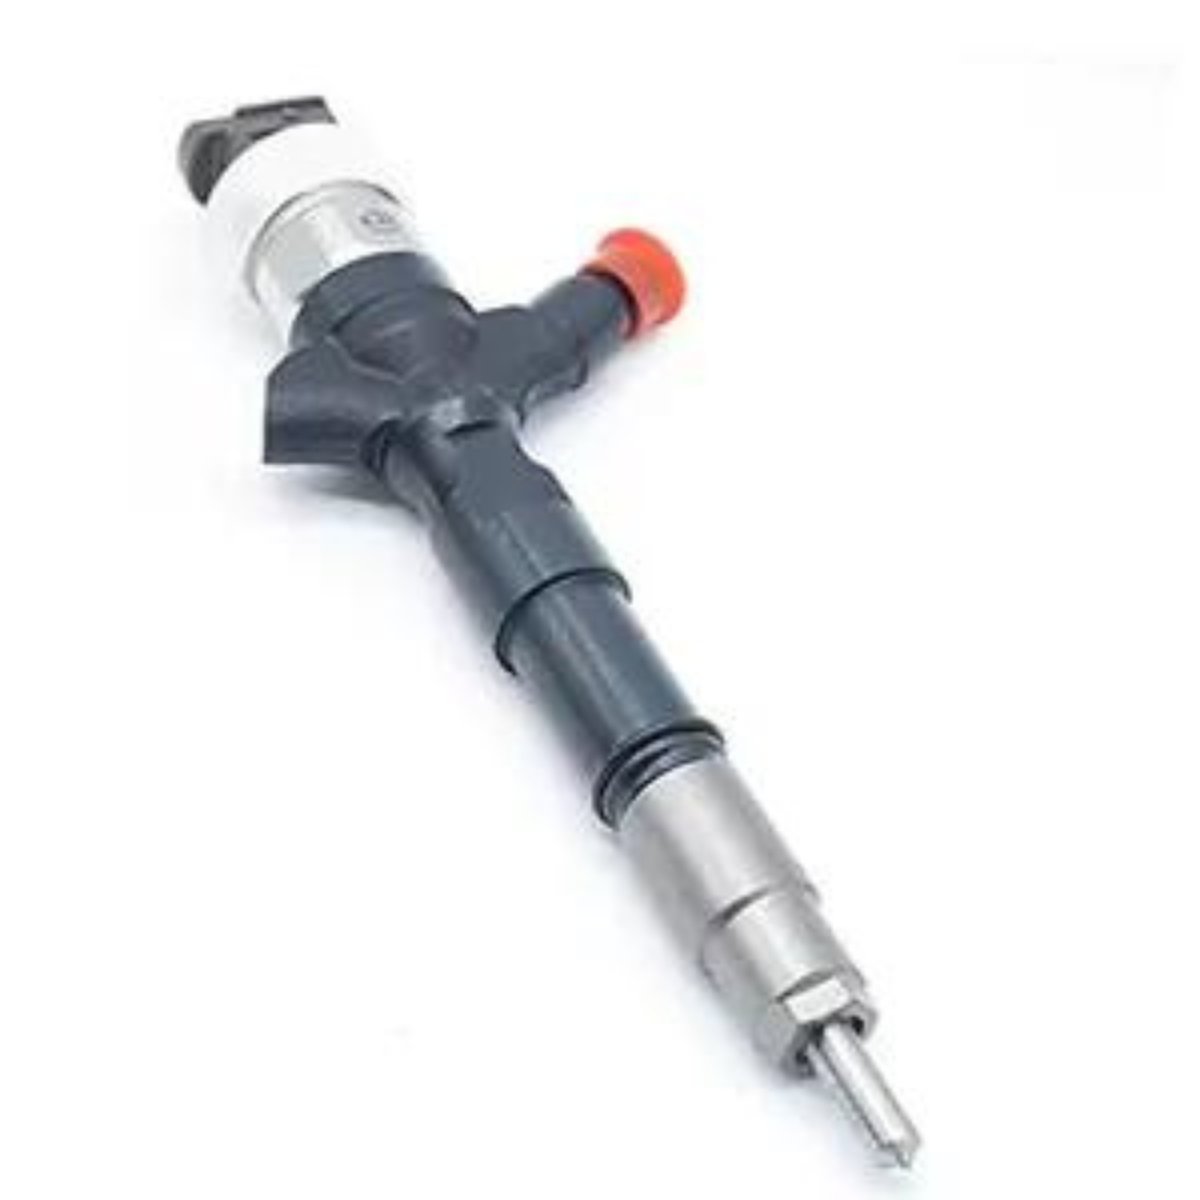 Inyector Denso Toyota 3.0 euro 4 - COMERCIAL CPR SPA - DENSO - 2367039365